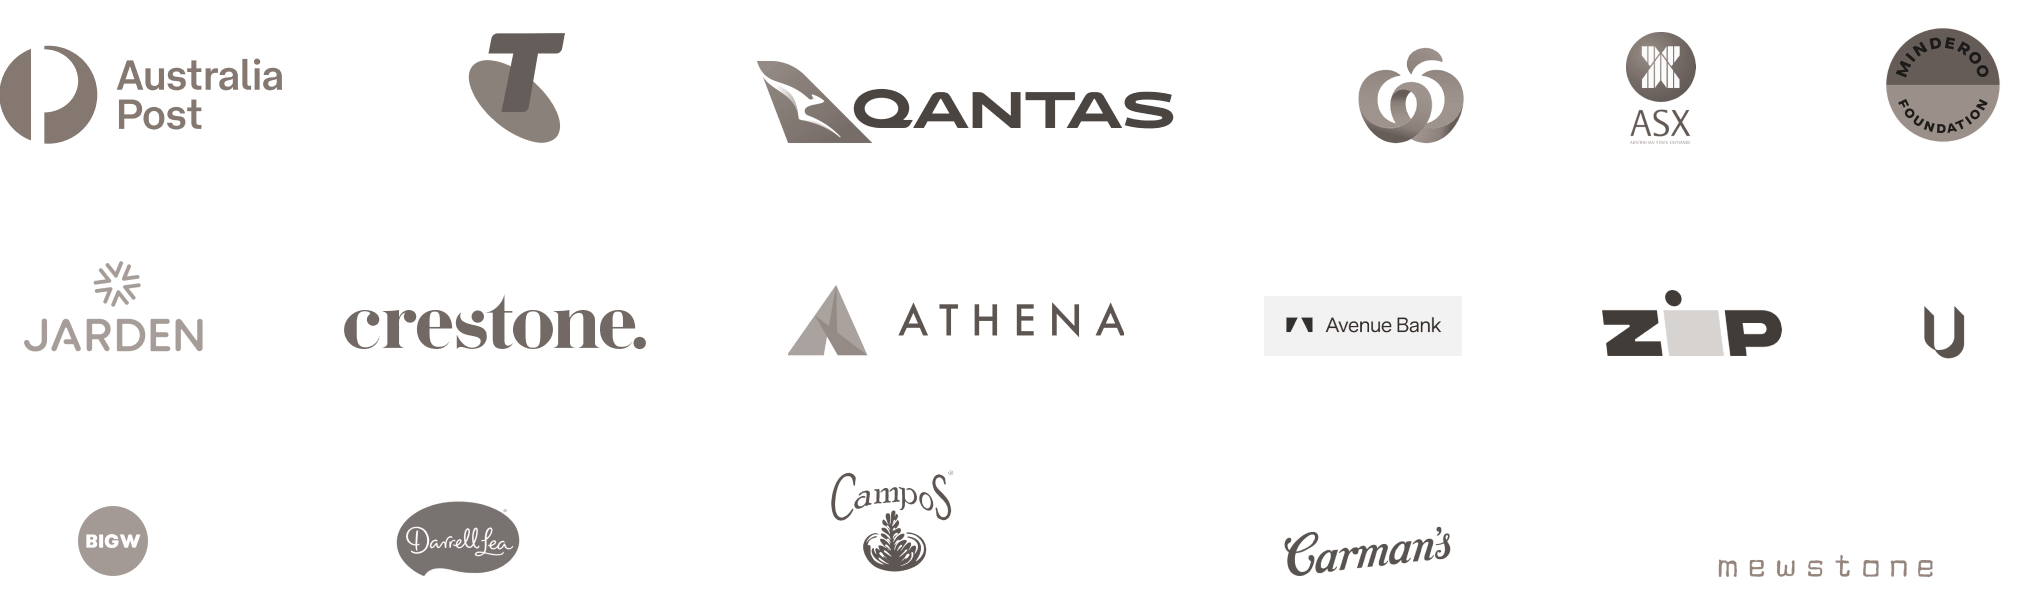 Our clients logos